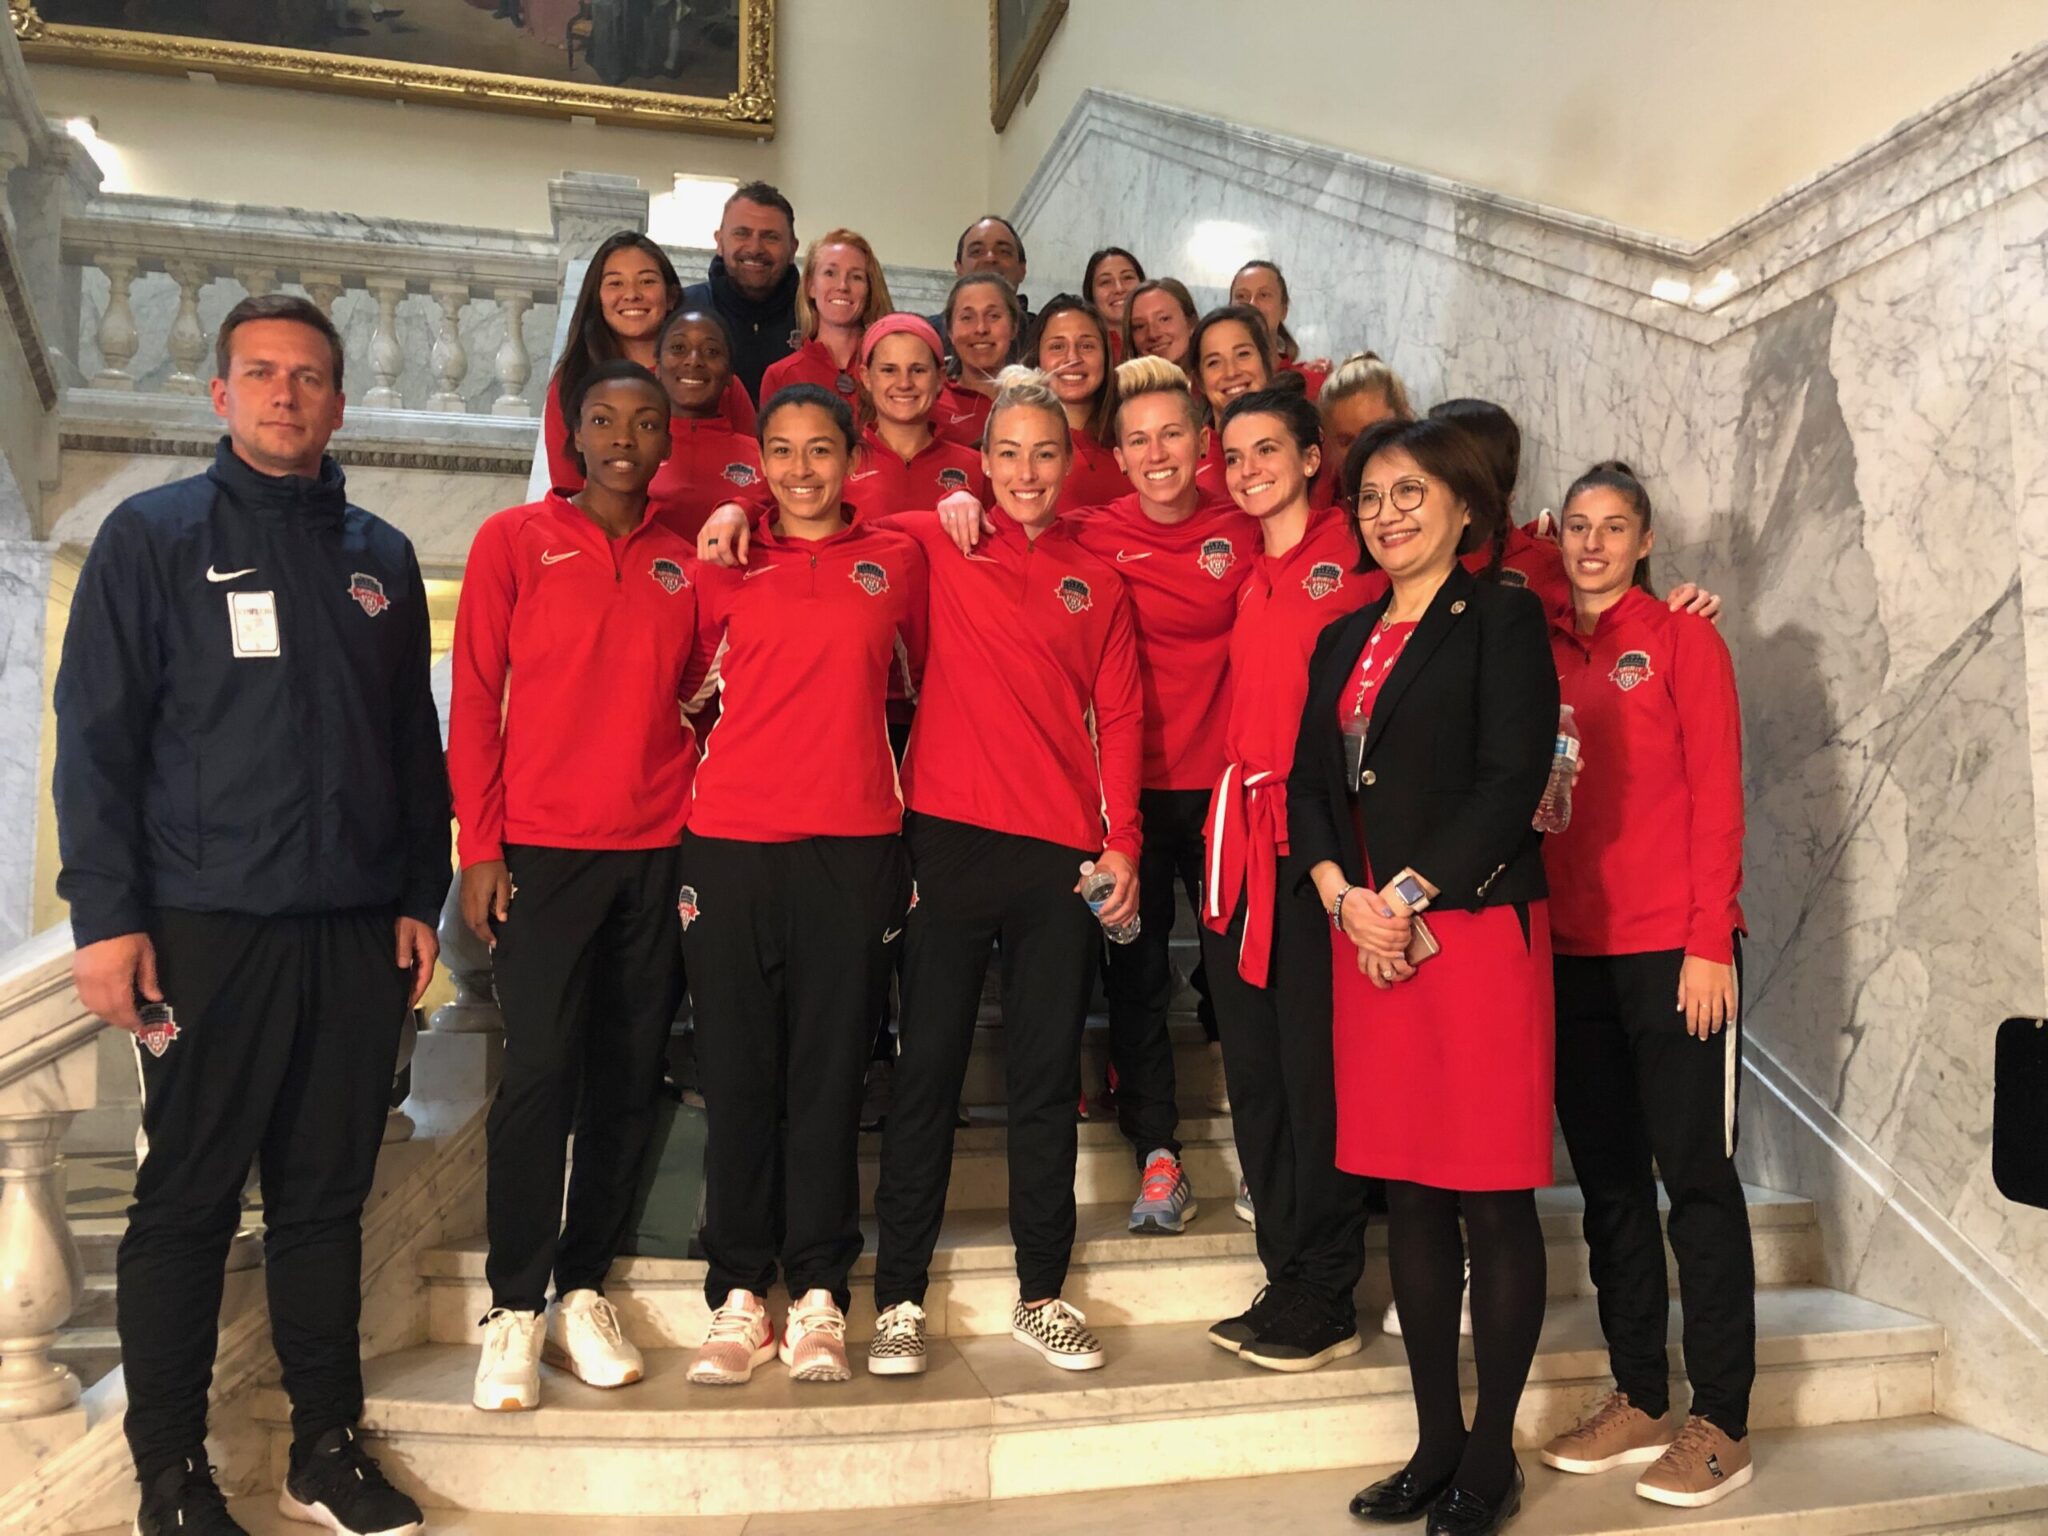 Washington Spirit players visit Maryland State House in Annapolis Featured Image